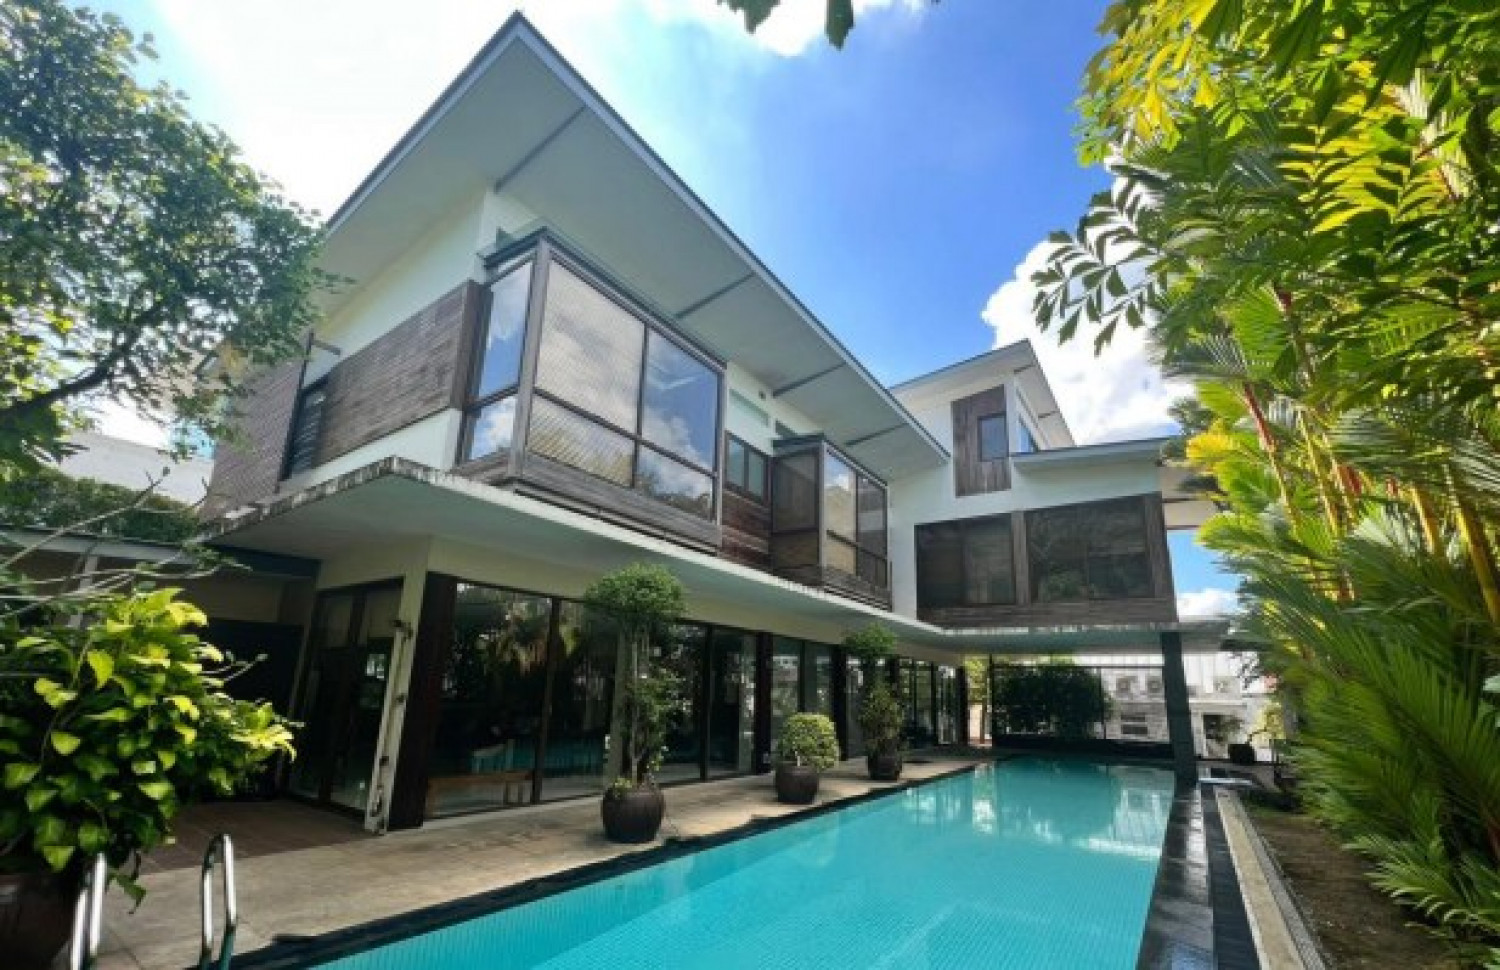 Detached house in Bin Tong Park for sale at $22.88 mil - Property News